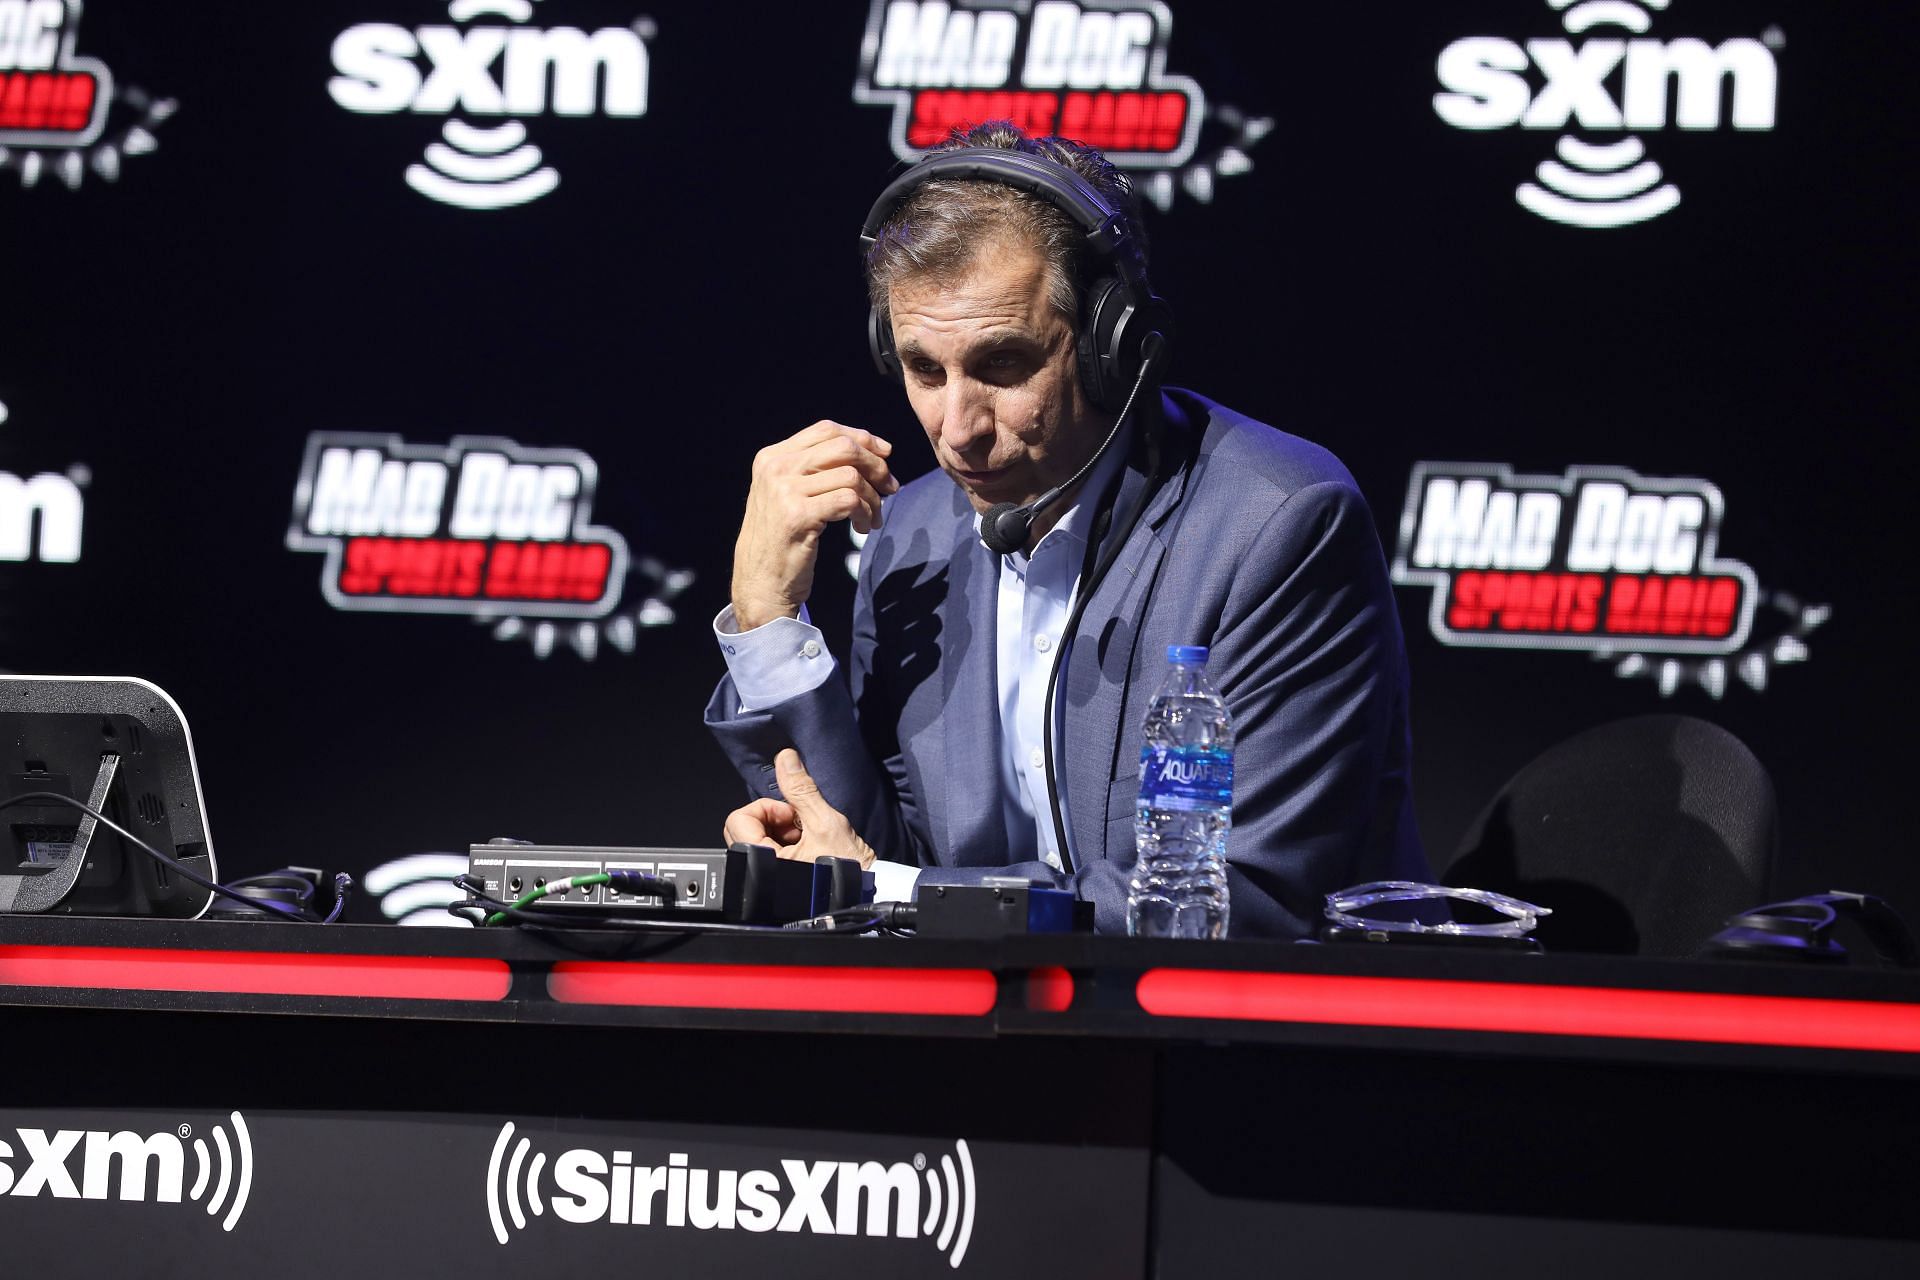 SiriusXM host Chris &quot;Mad Dog&quot; Russo speaks onstage during Day 2 of SiriusXM at Super Bowl LIV.